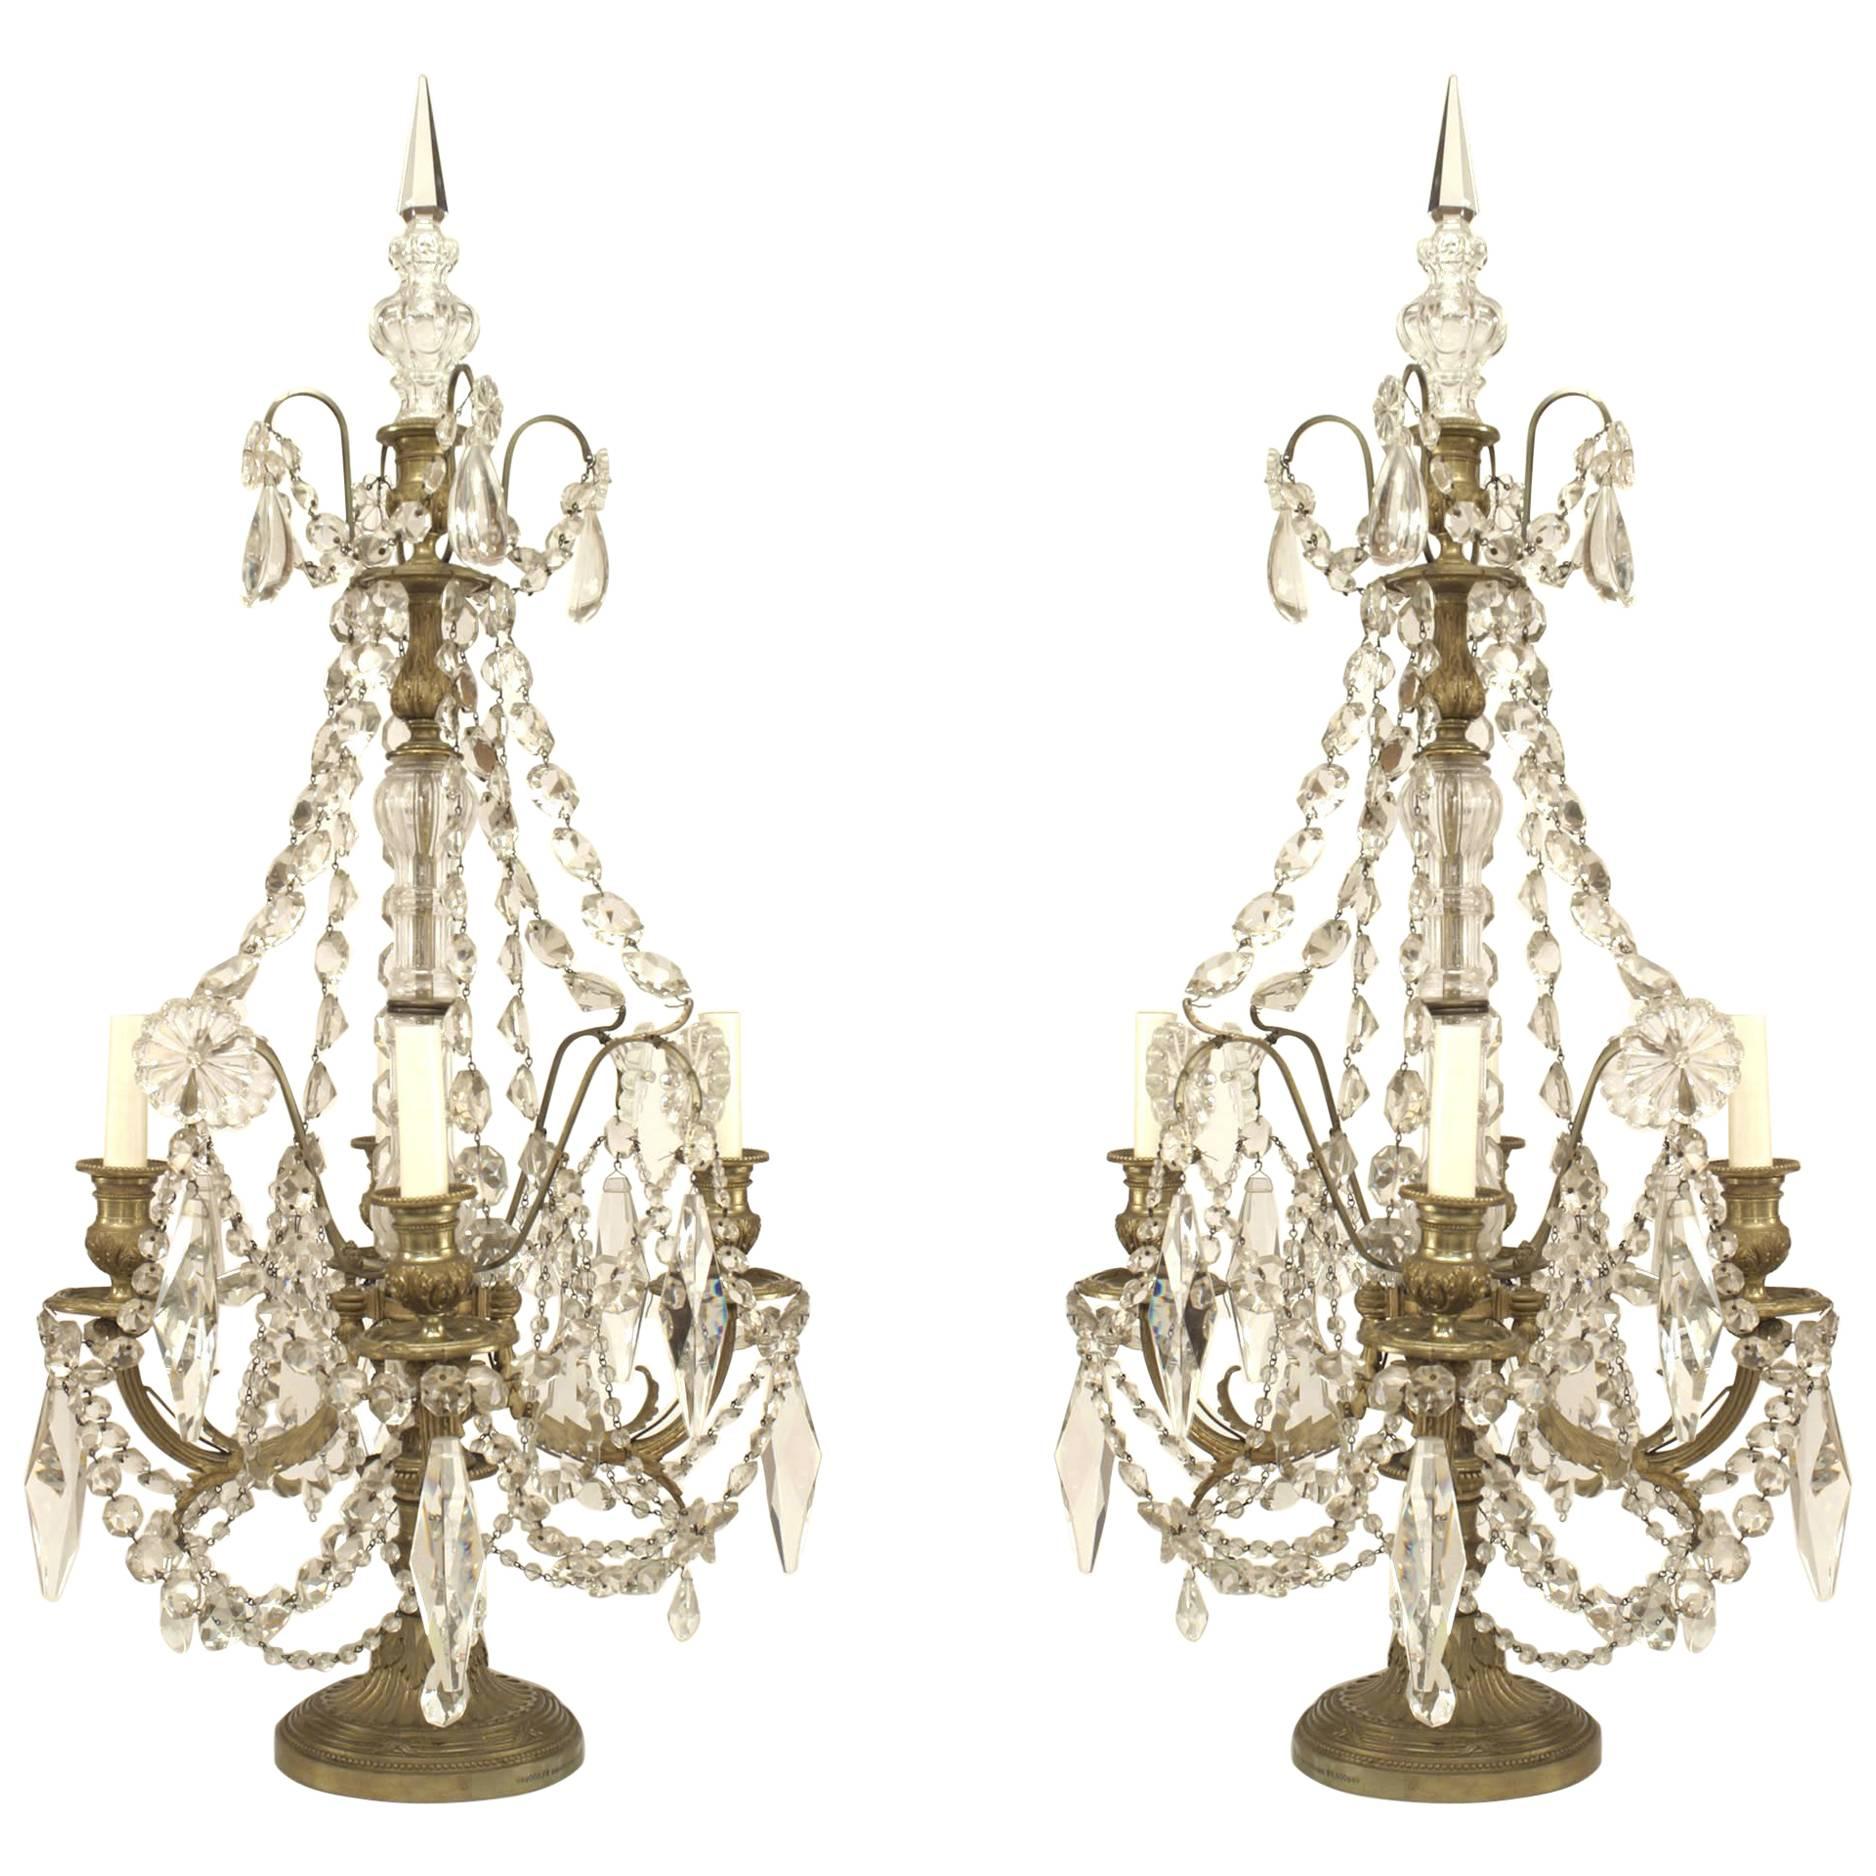 Pair of French Victorian Bronze and Crystal Candelabras